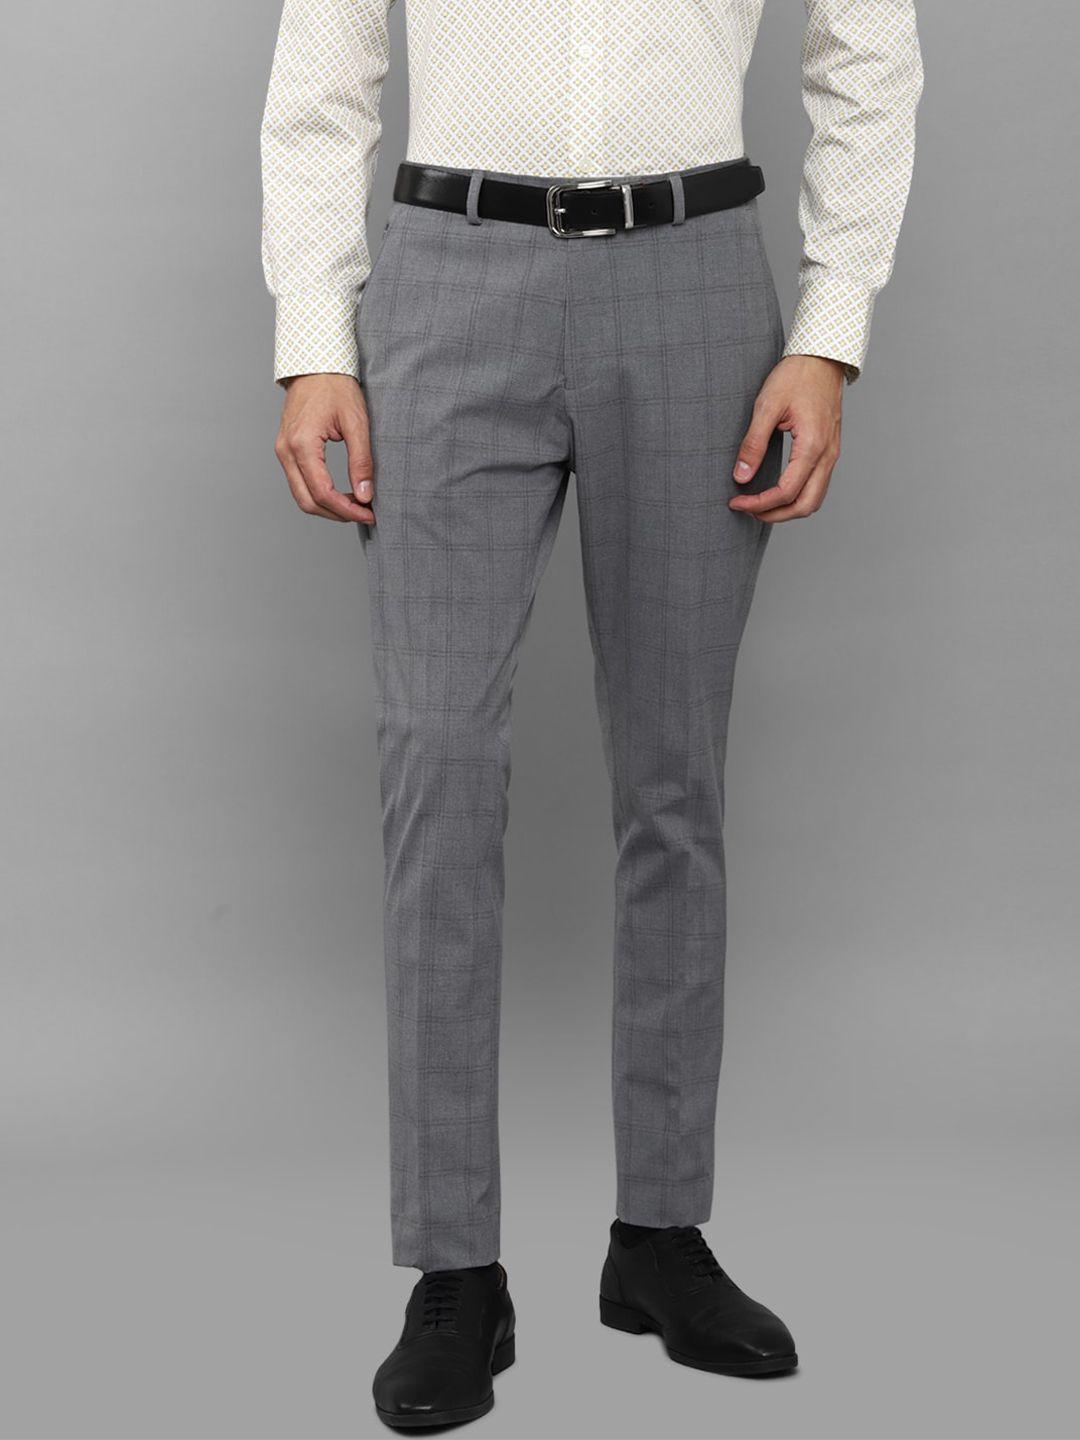 louis philippe men grey checked slim fit trousers